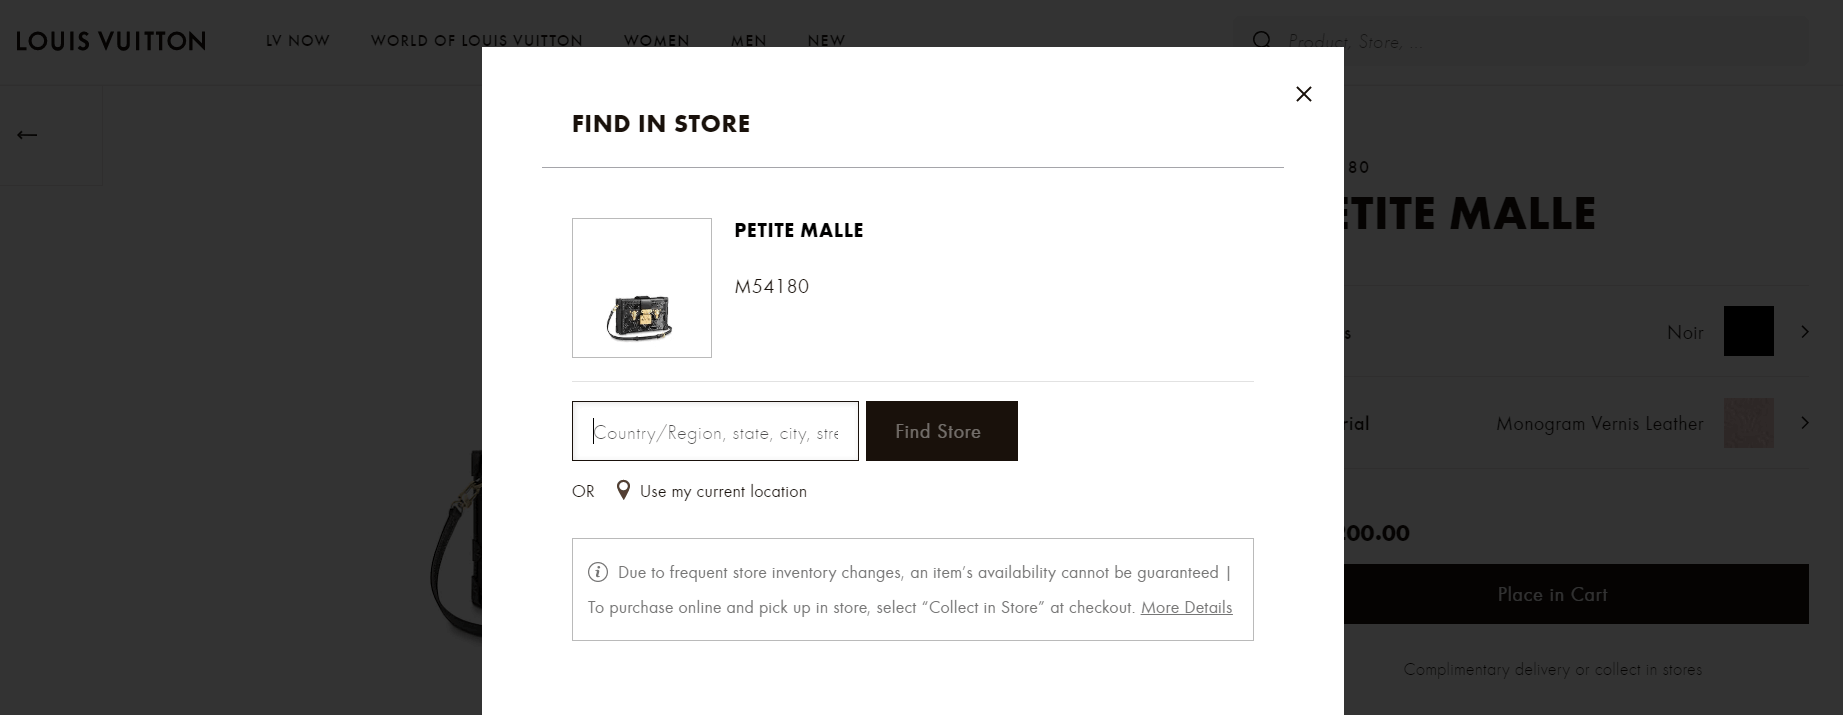 Louis Vuitton find in store website feature 